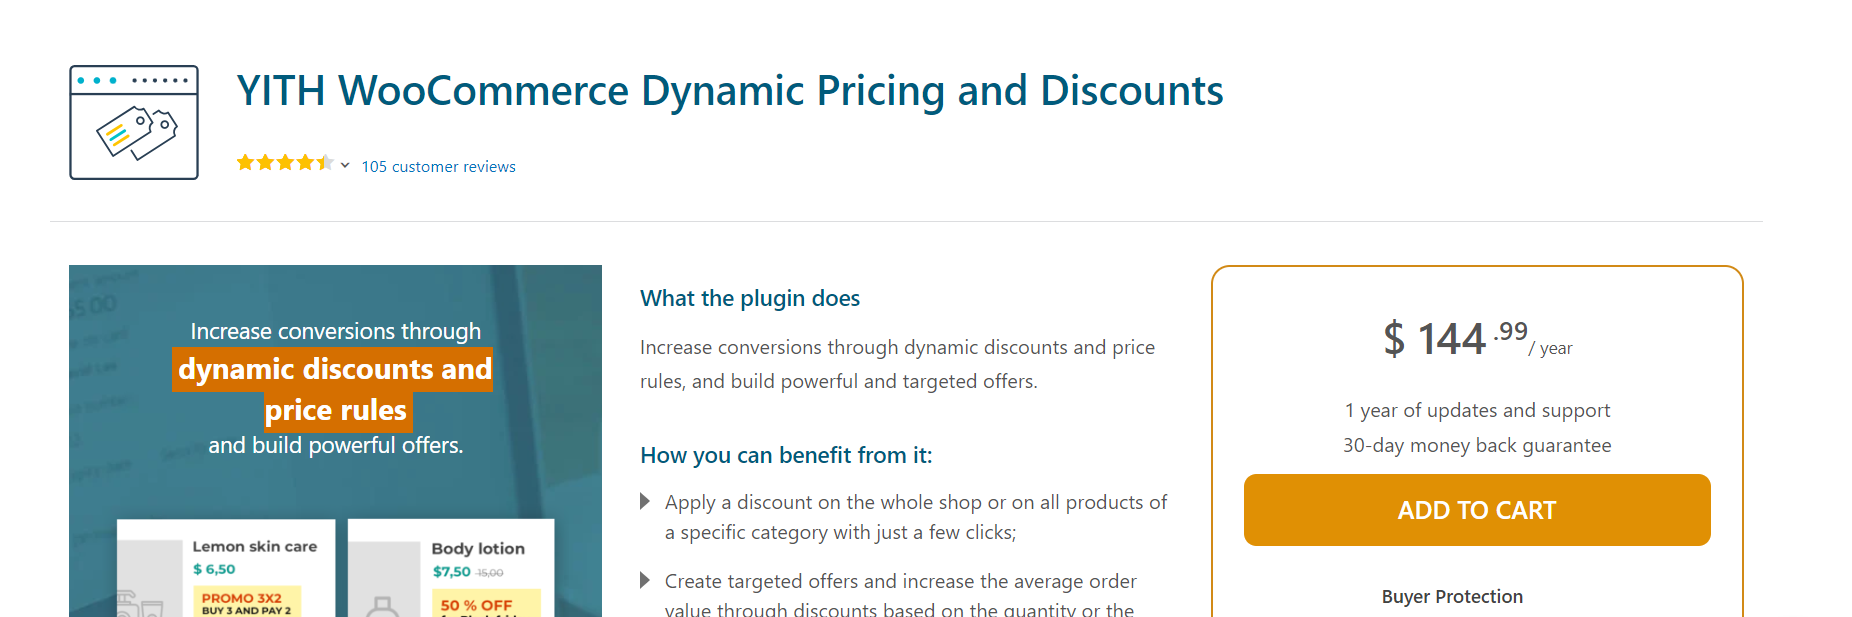 YITH WooCommerce Dynamic Pricing